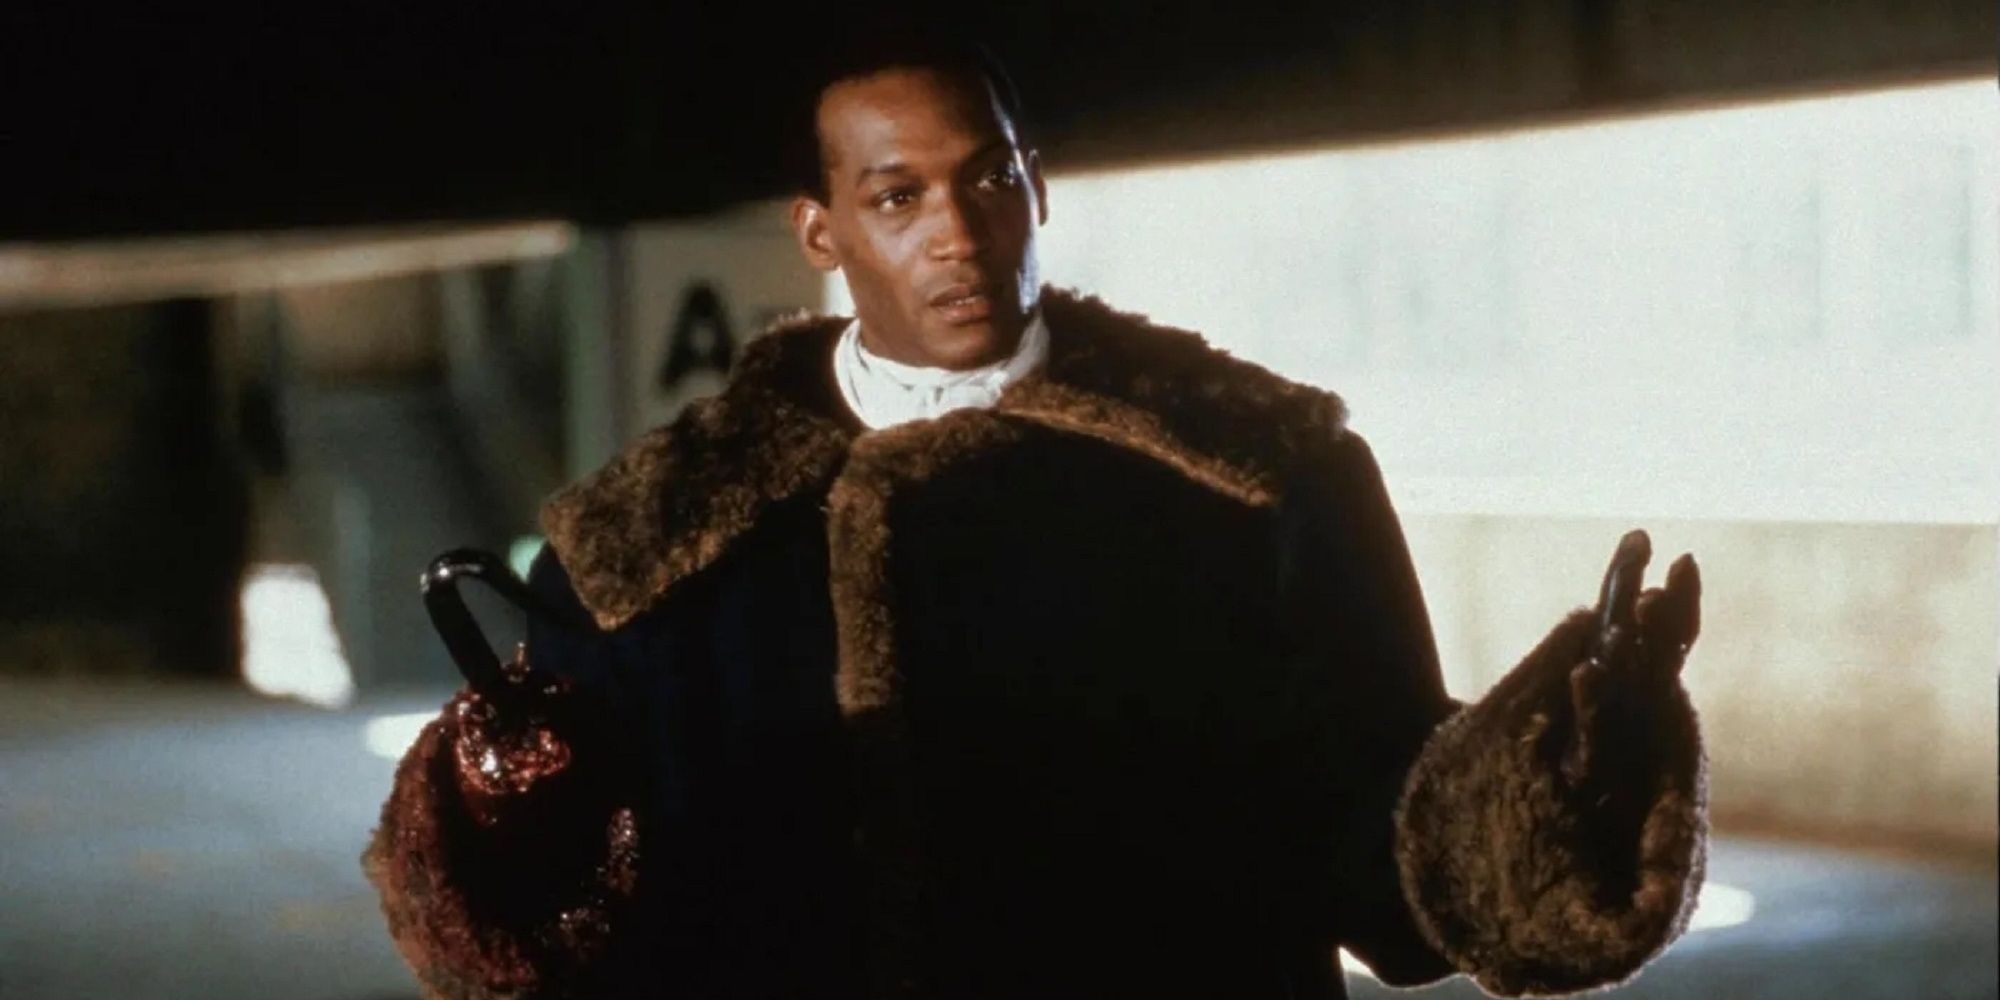 Candyman in his big fur coat in the movie, Candyman.